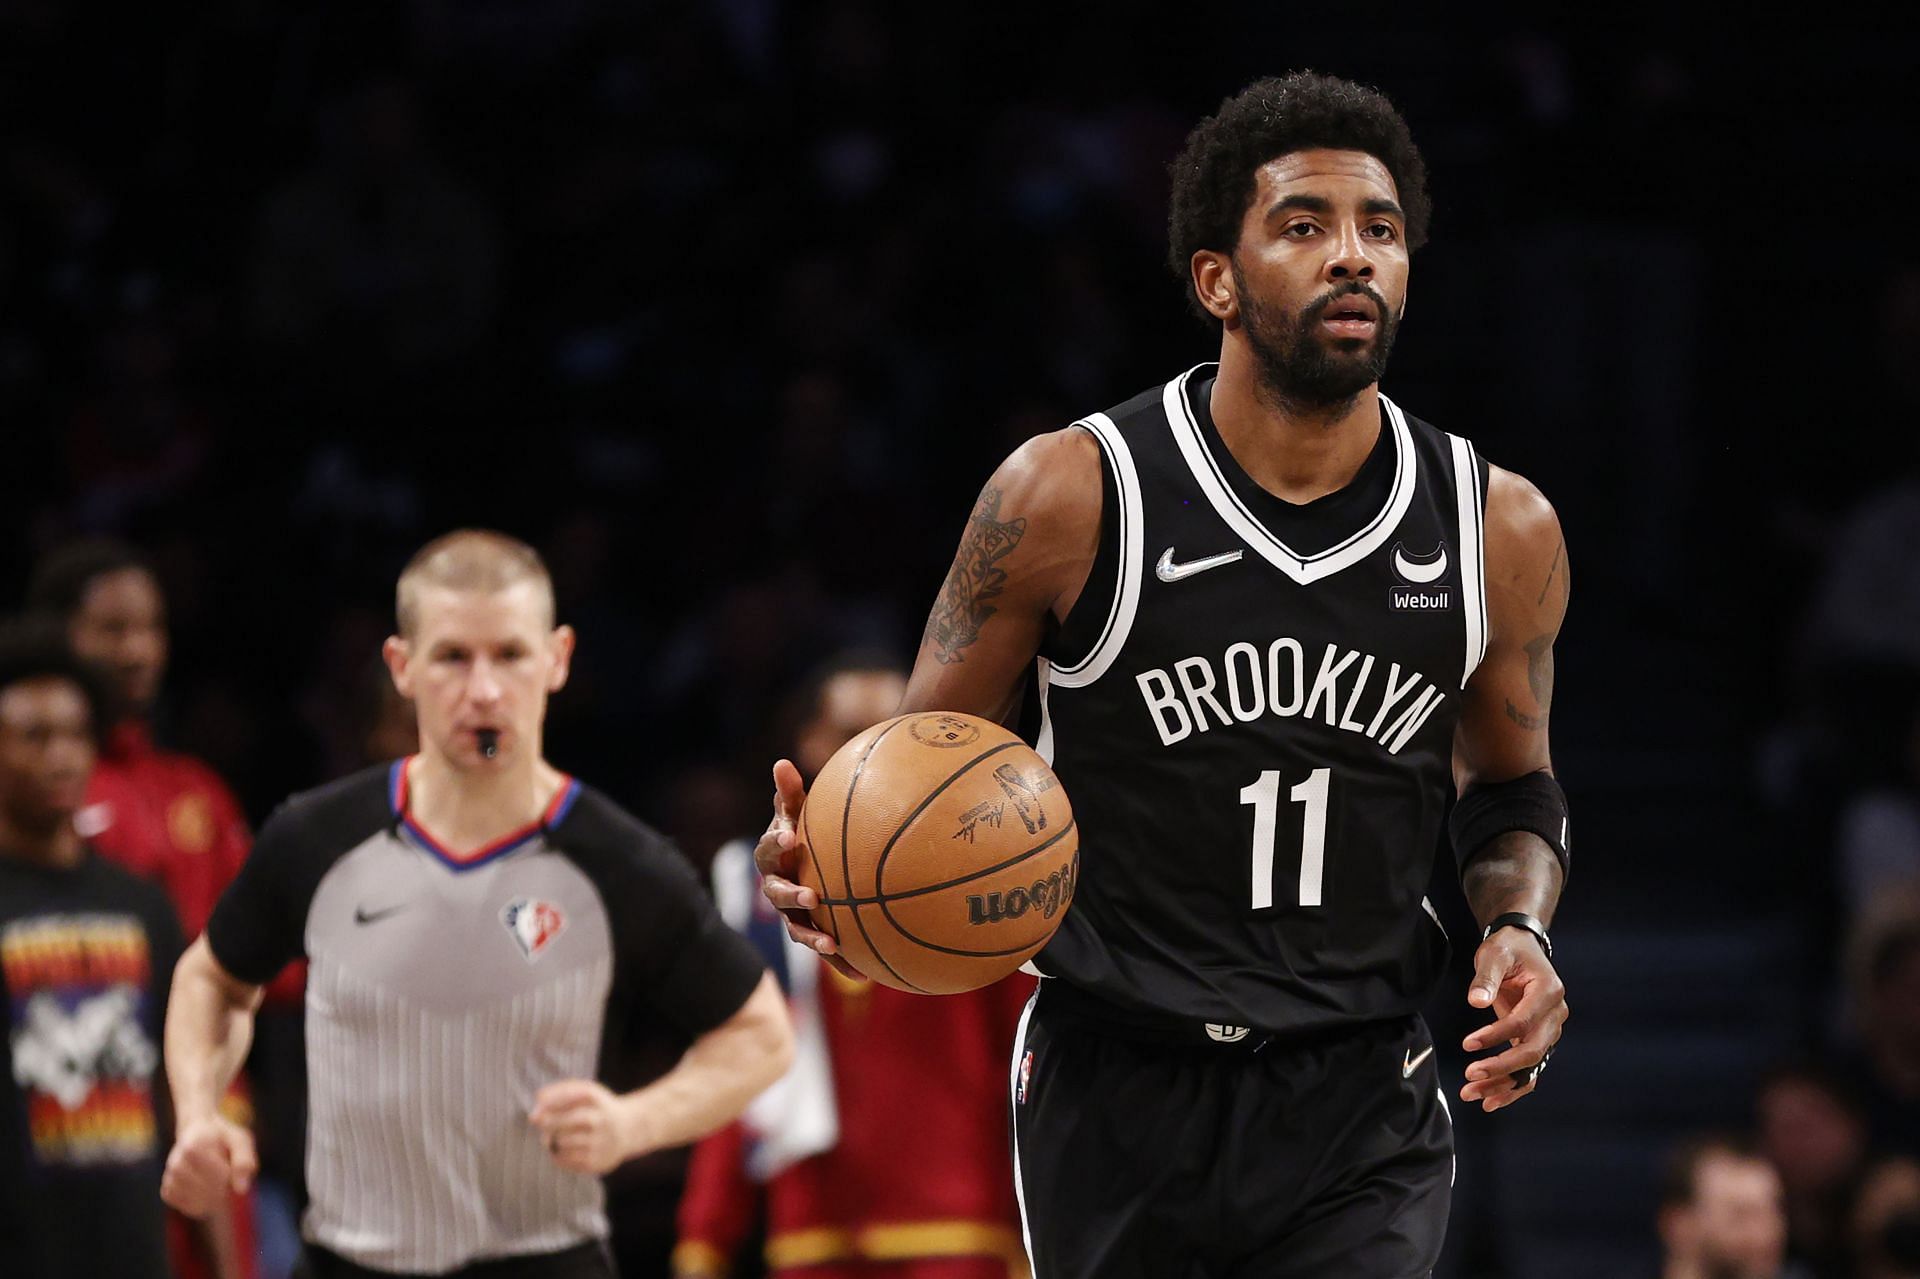 In the play-in game, Kyrie Irving and the Brooklyn Nets put on a show against the Clevland Cavaliers.